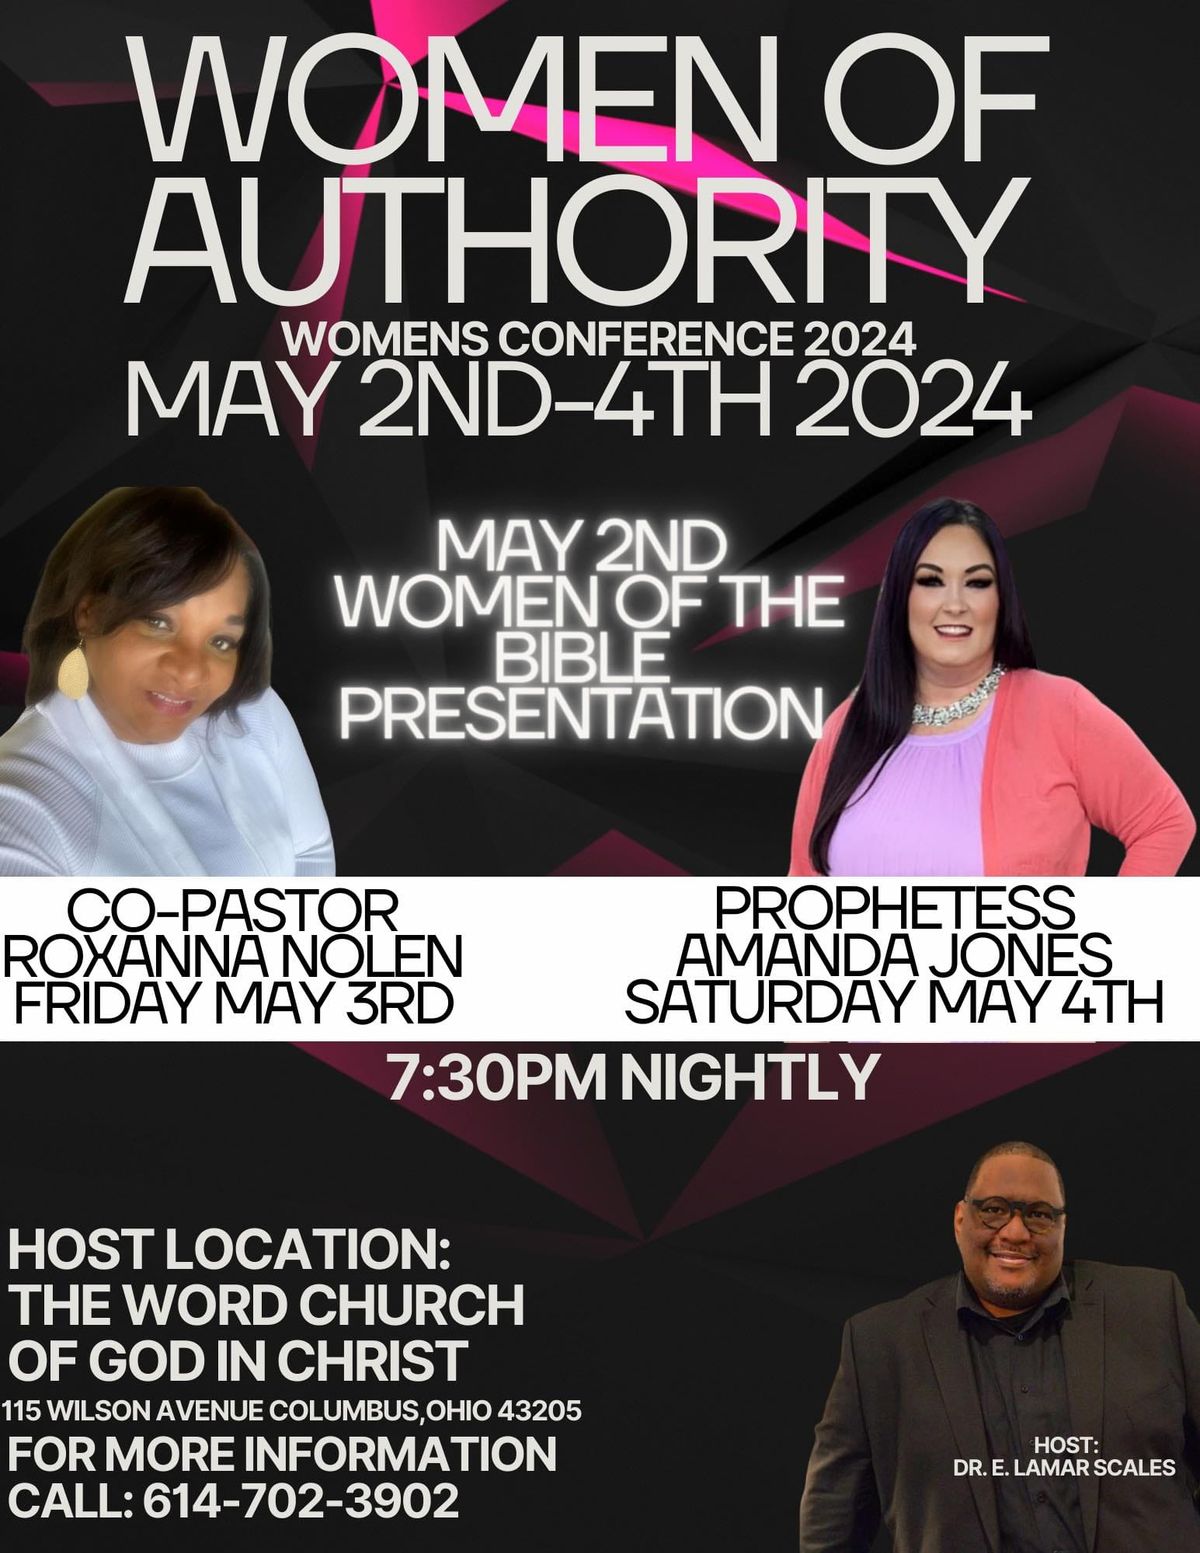 WOA Women's Conference "Women of Authority"